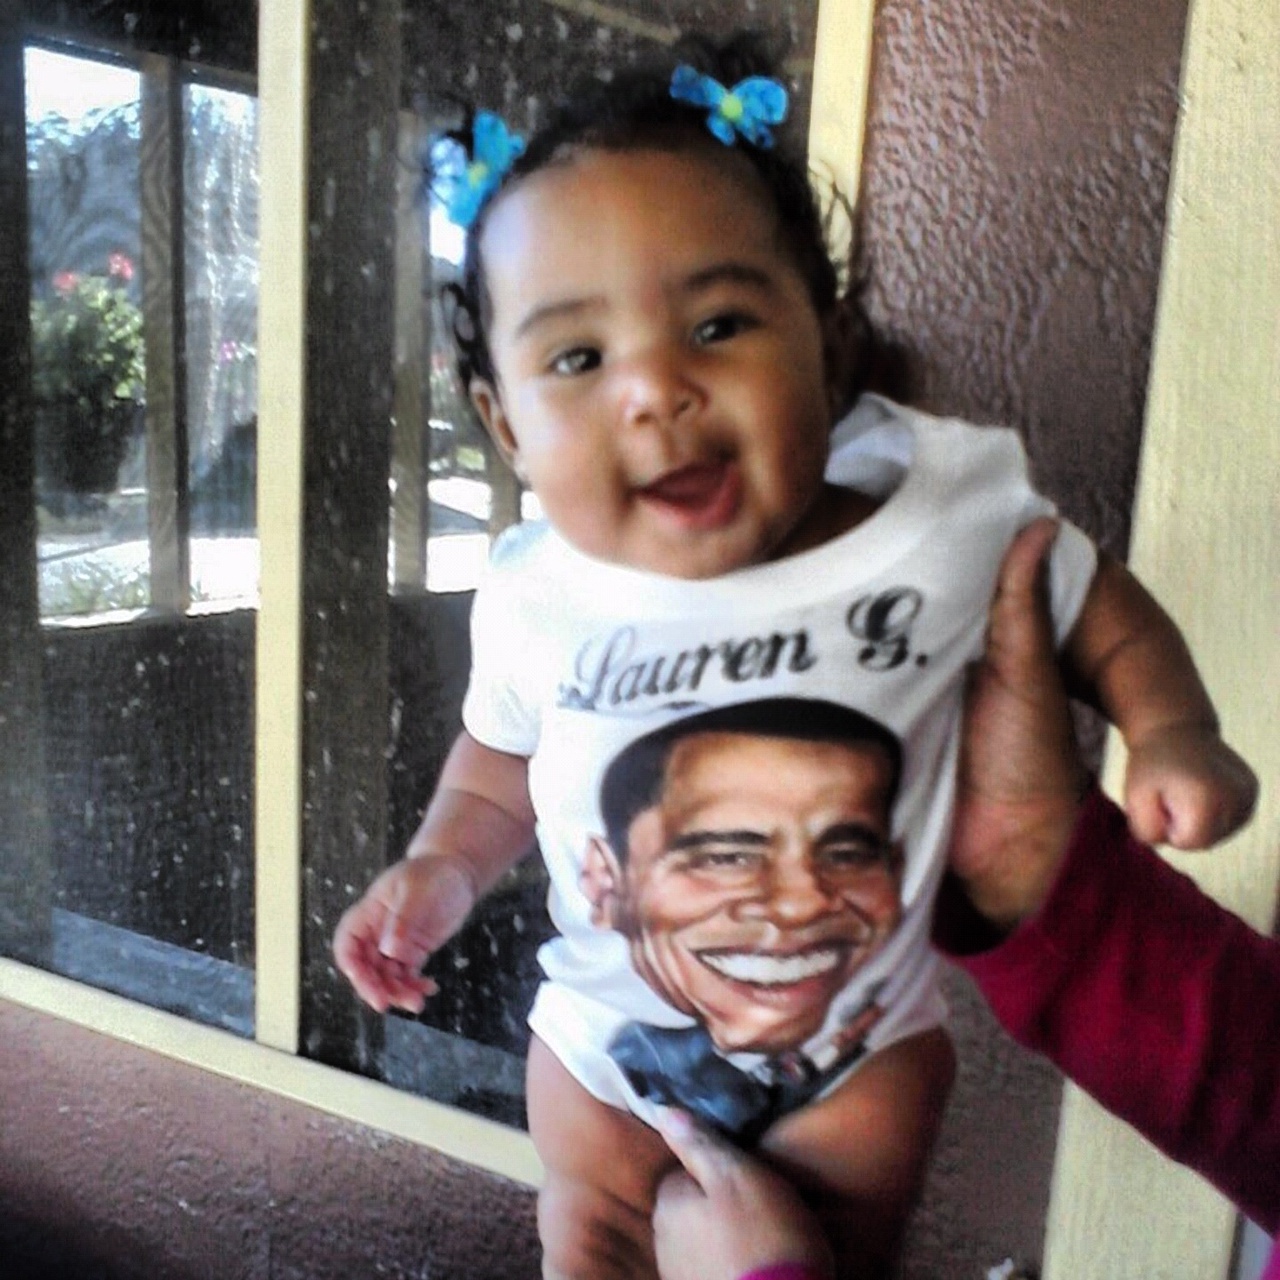 SHE LOVE HER ONESIE made with sublimation printing